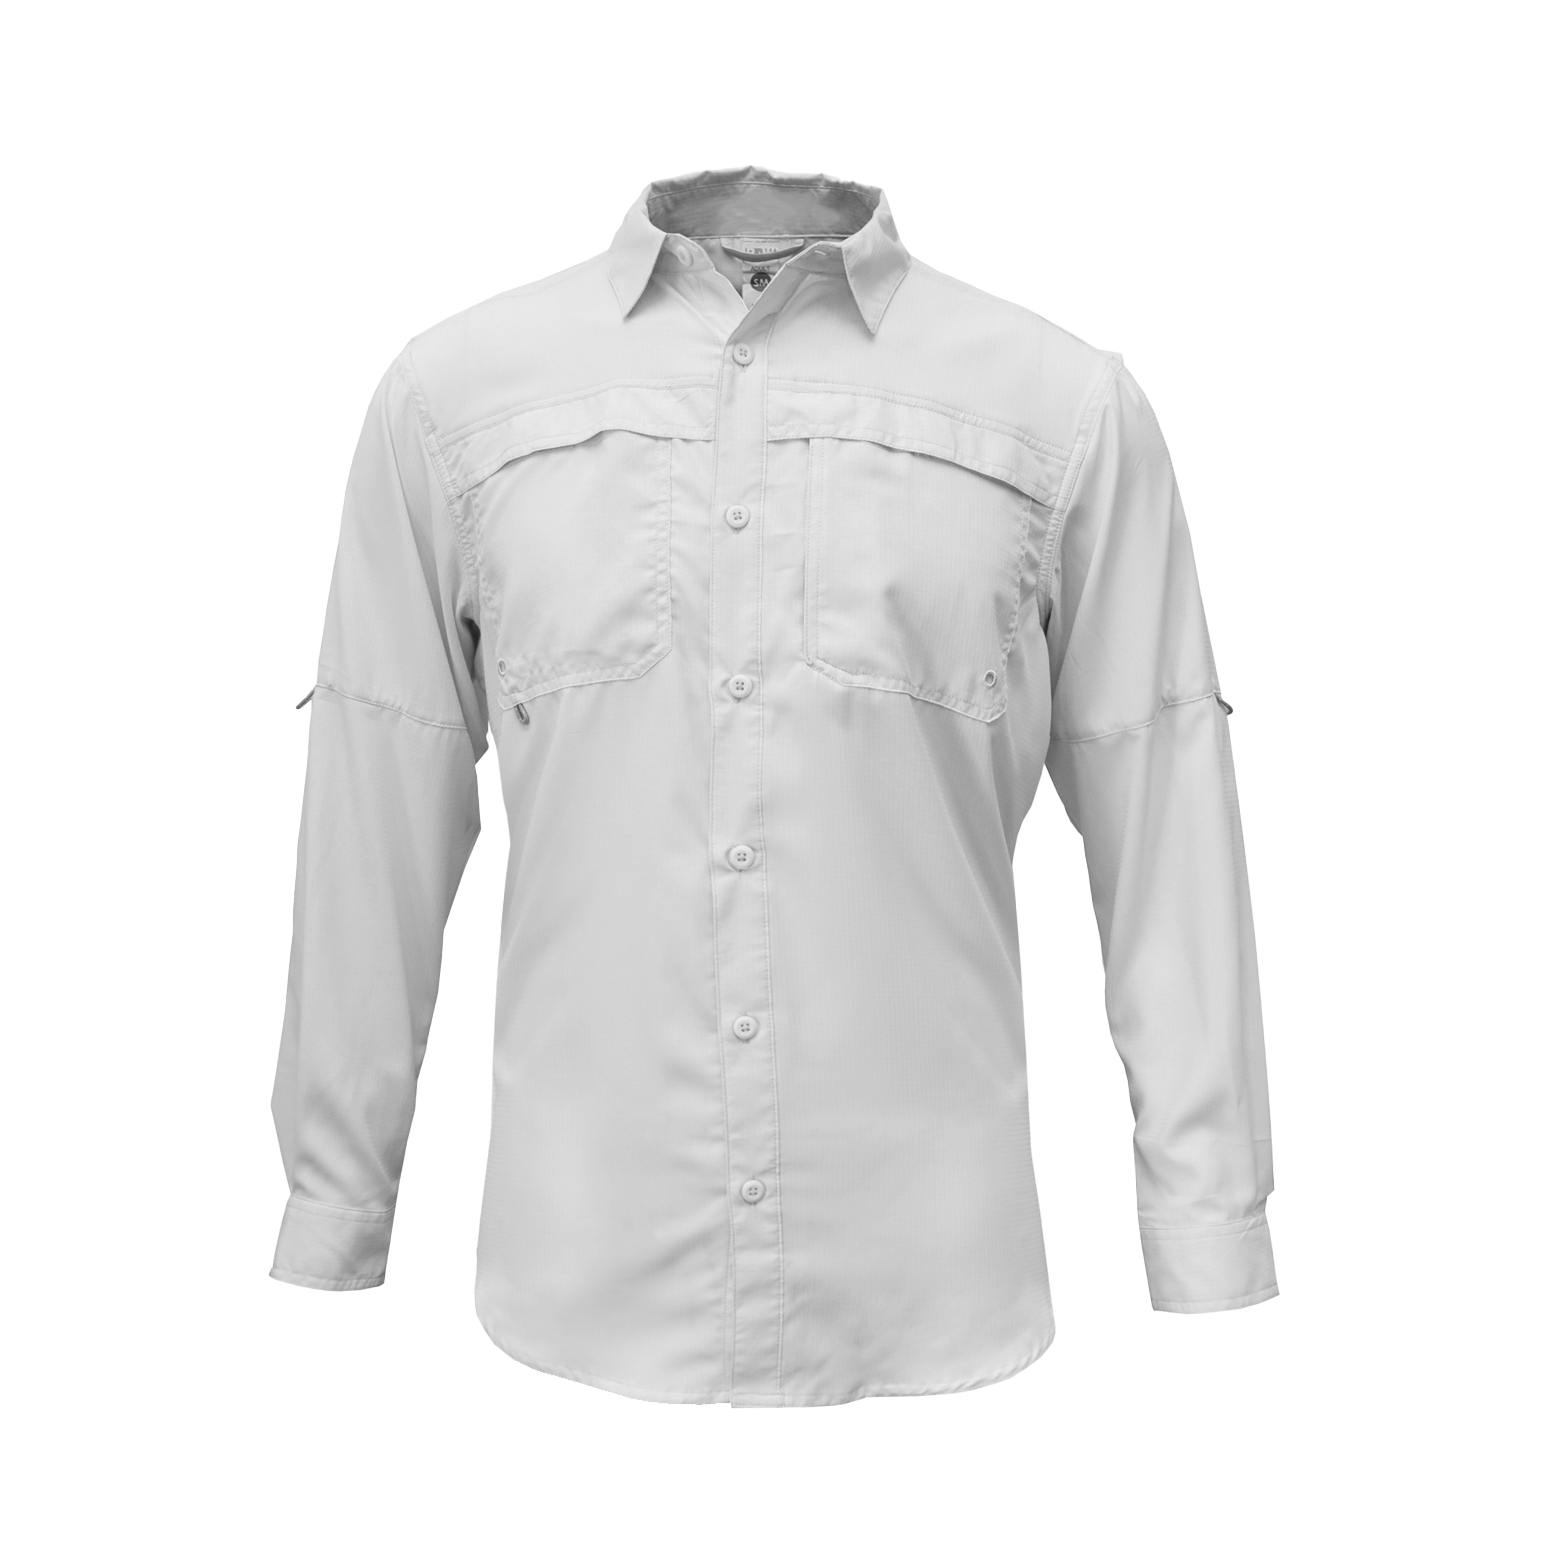 Unbranded Unisex Adults Long Sleeve Fishing Shirts & Tops for sale